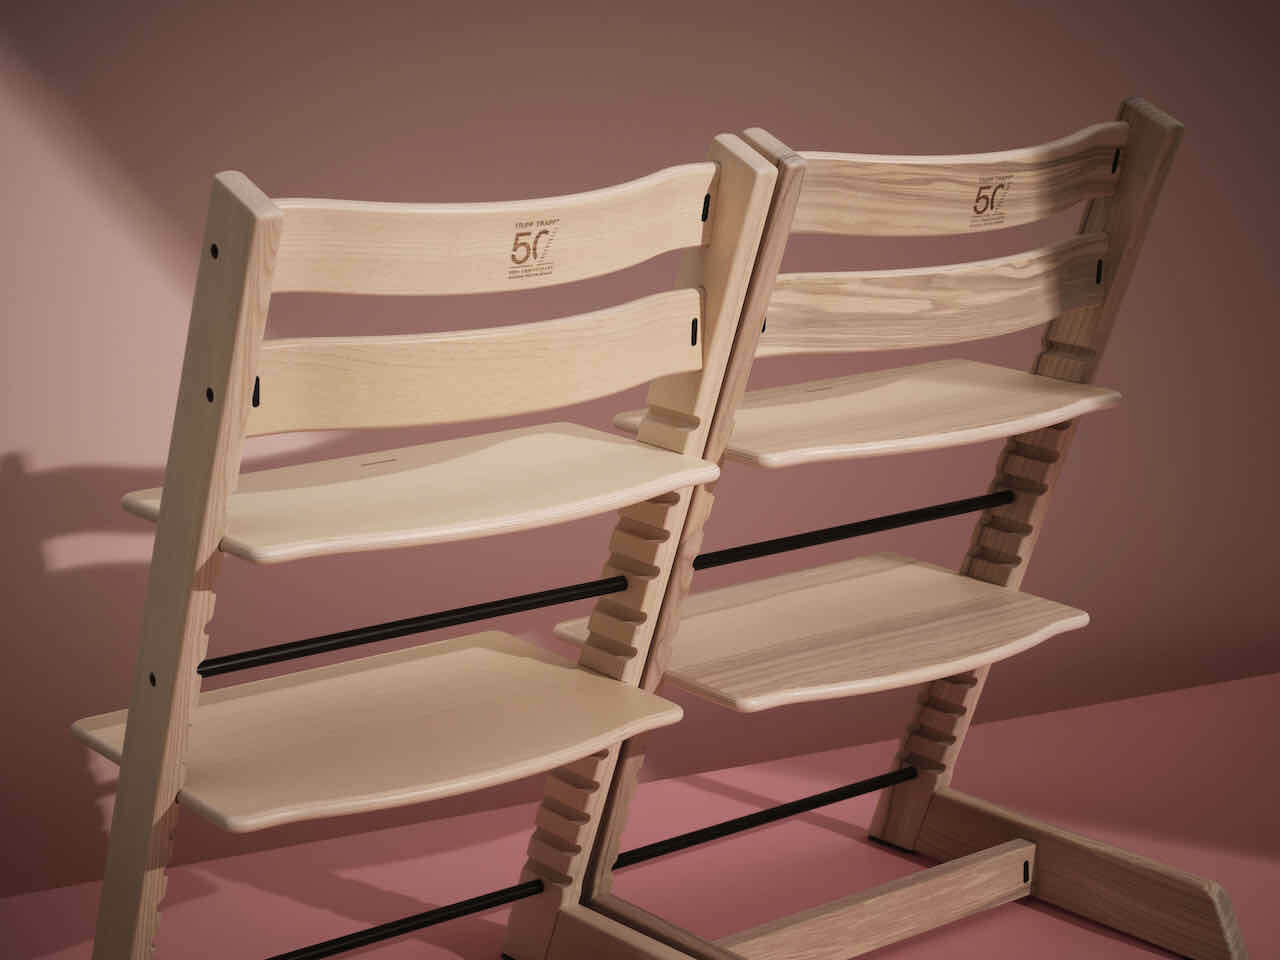 Stokke Tripp Trapp limited editions